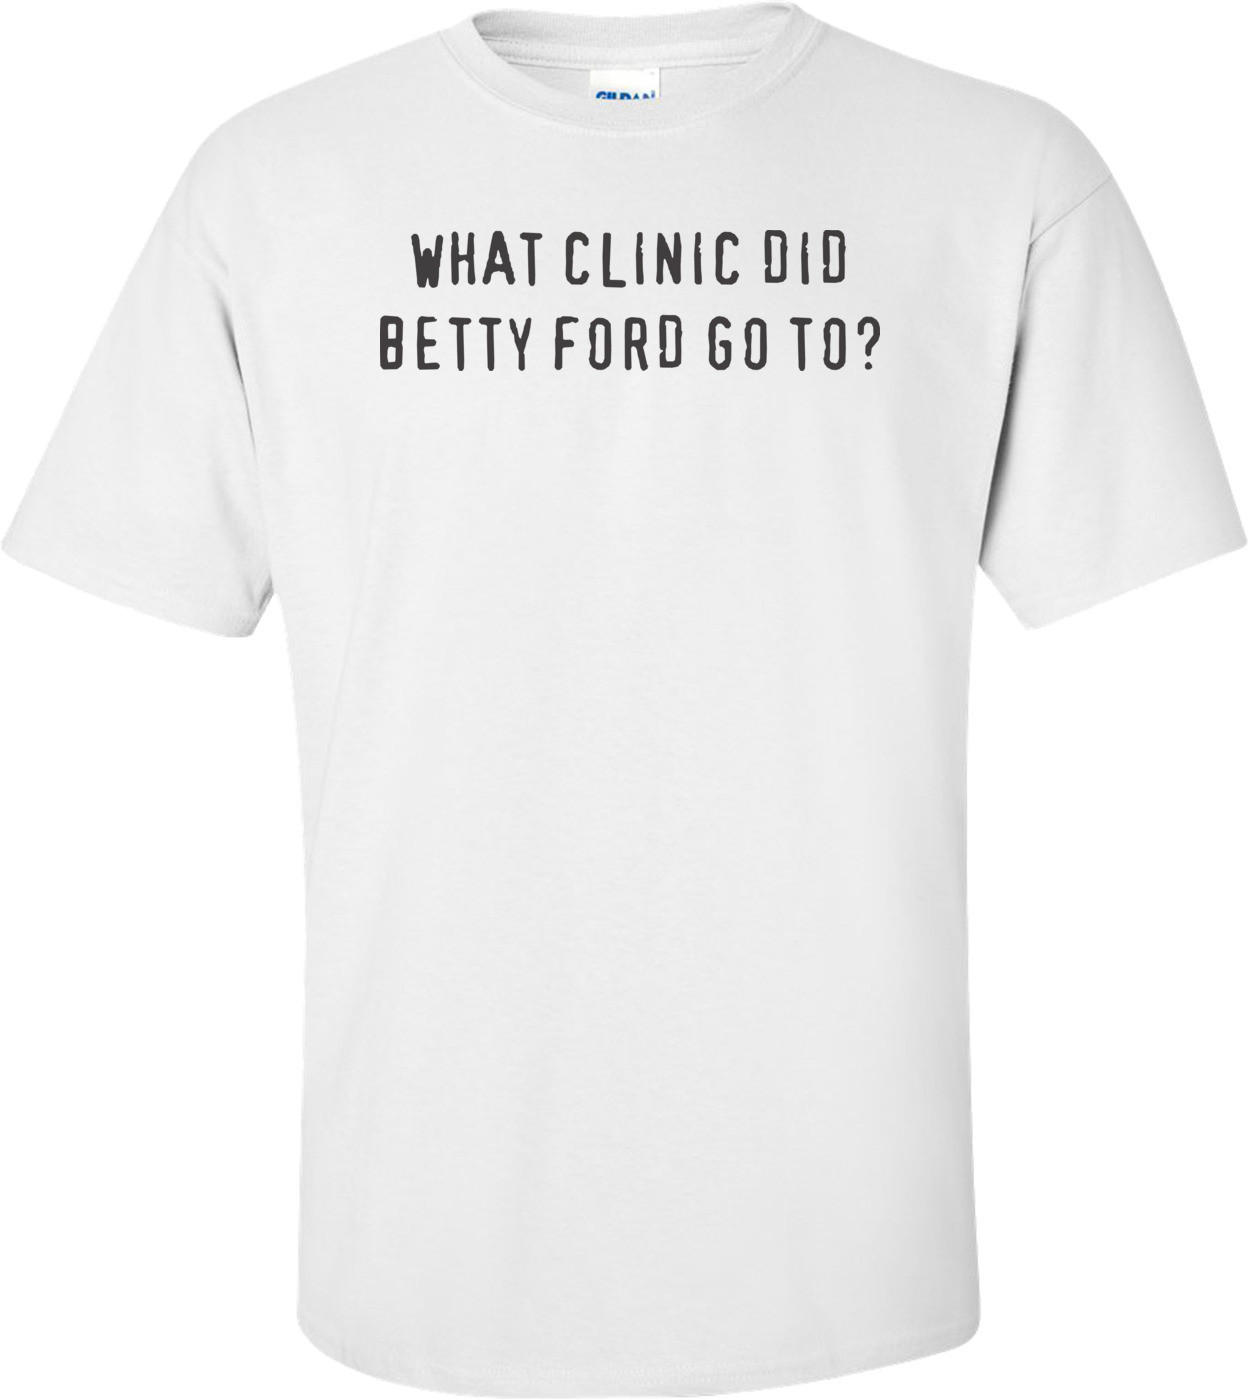 What Clinic Did Betty Ford Go To?